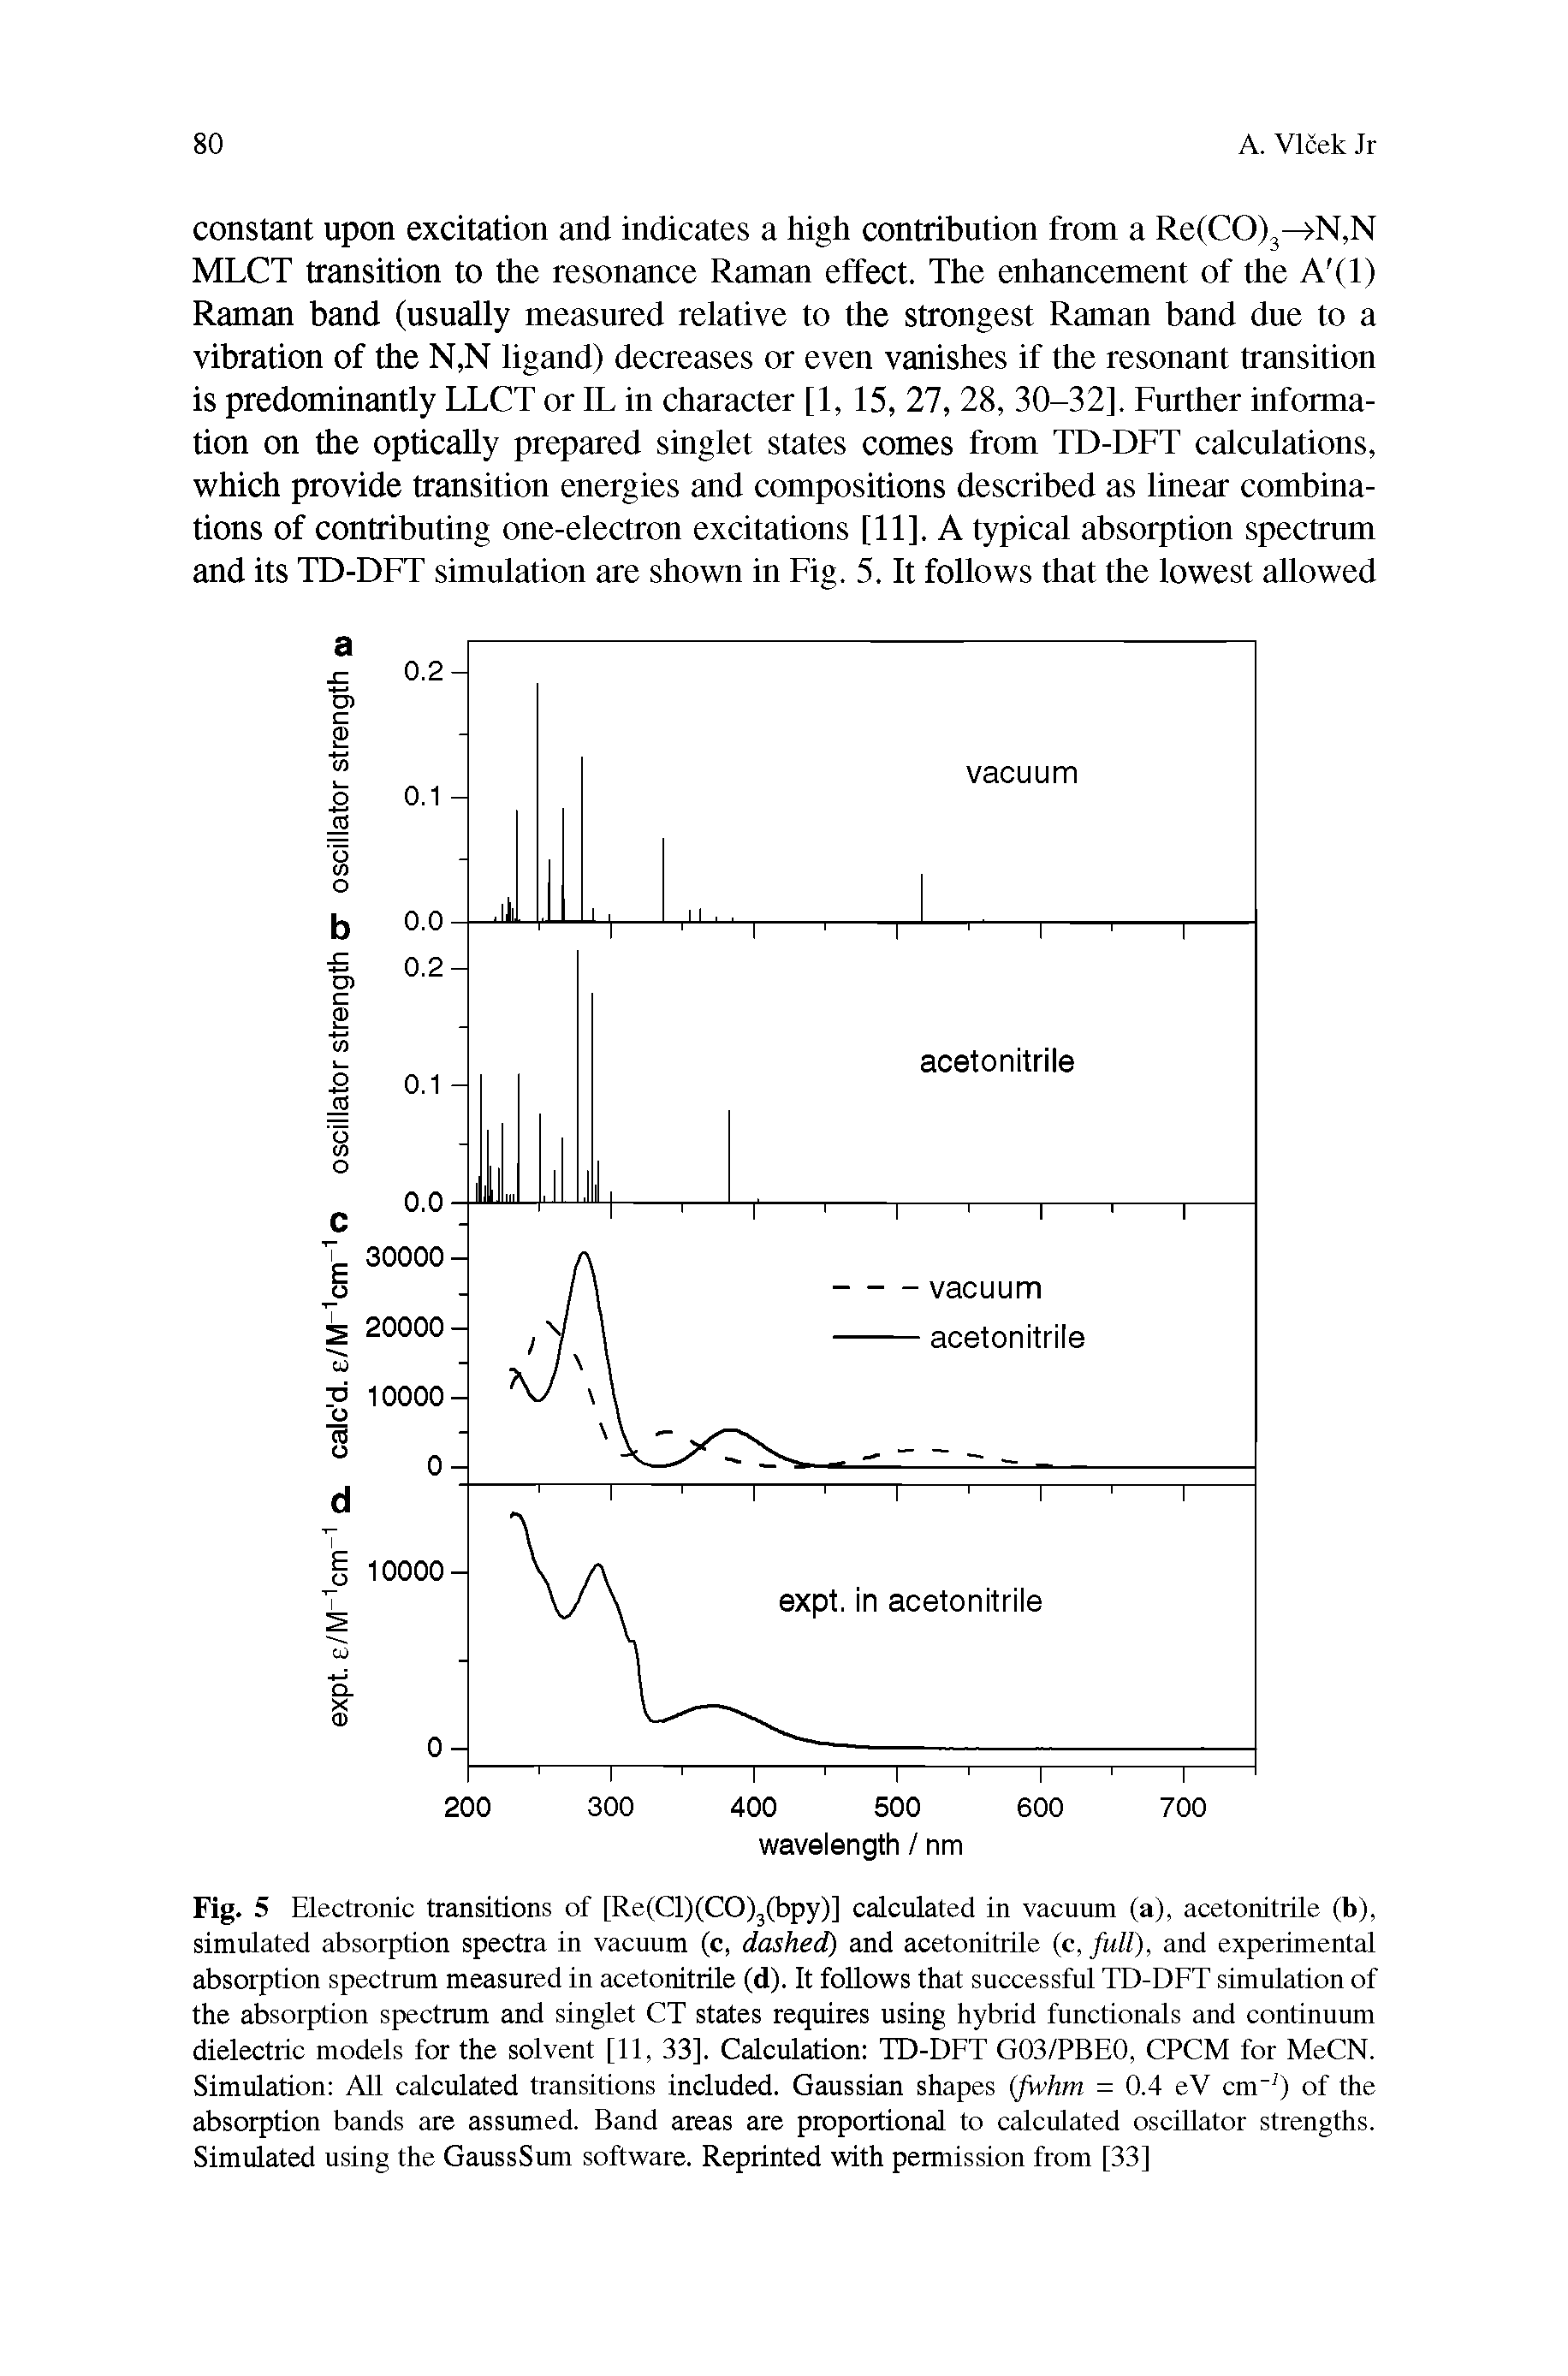 Fig. 5 Electronic transitions of [Re(Cl)(CO)3(bpy)] calculated in vacuum (a), acetonitrile (b), simulated absorption spectra in vacuum (c, dashed) and acetonitrile (c, full), and experimental absorption spectrum measured in acetonitrile (d). It follows that successful TD-DFT simulation of the absorption spectrum and singlet CT states requires using hybrid functionals and continuum dielectric models for the solvent [11, 33], Calculation TD-DFT G03/PBE0, CPCM for MeCN. Simulation All calculated transitions included. Gaussian shapes (jwhm = 0.4 eV cm- ) of the absorption bands are assumed. Band areas are proportional to calculated oscillator strengths. Simulated using the GaussSum software. Reprinted with permission from [33]...